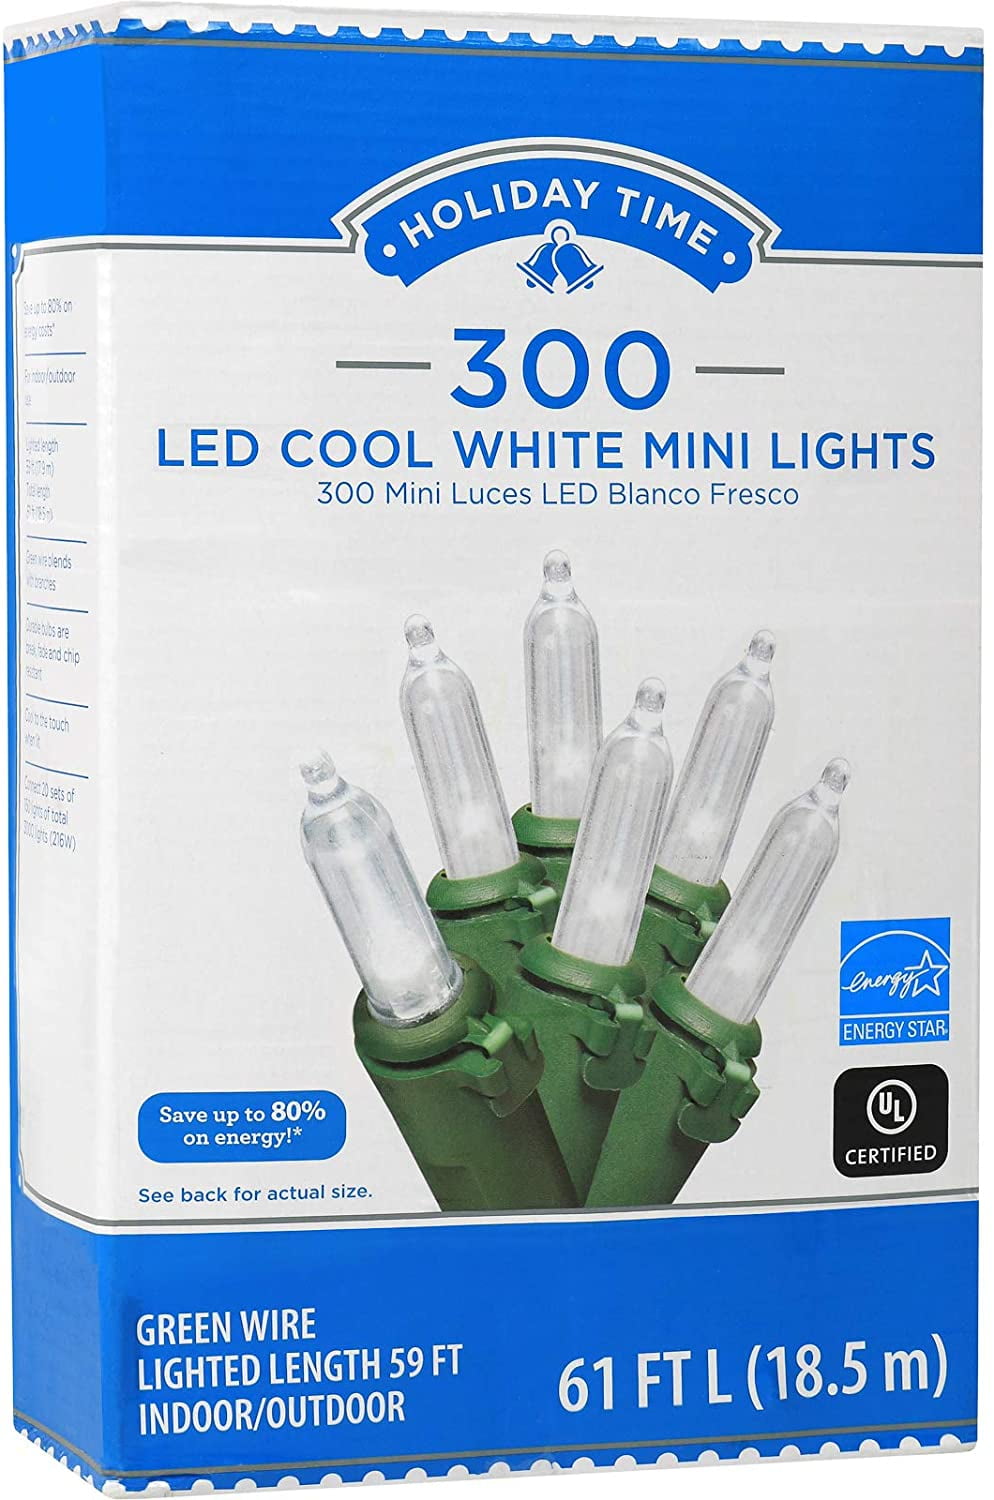 Details about   300 Mini Lights Indoor Outdoor Holiday Light Multi Colors Green wire 61.5 ft 